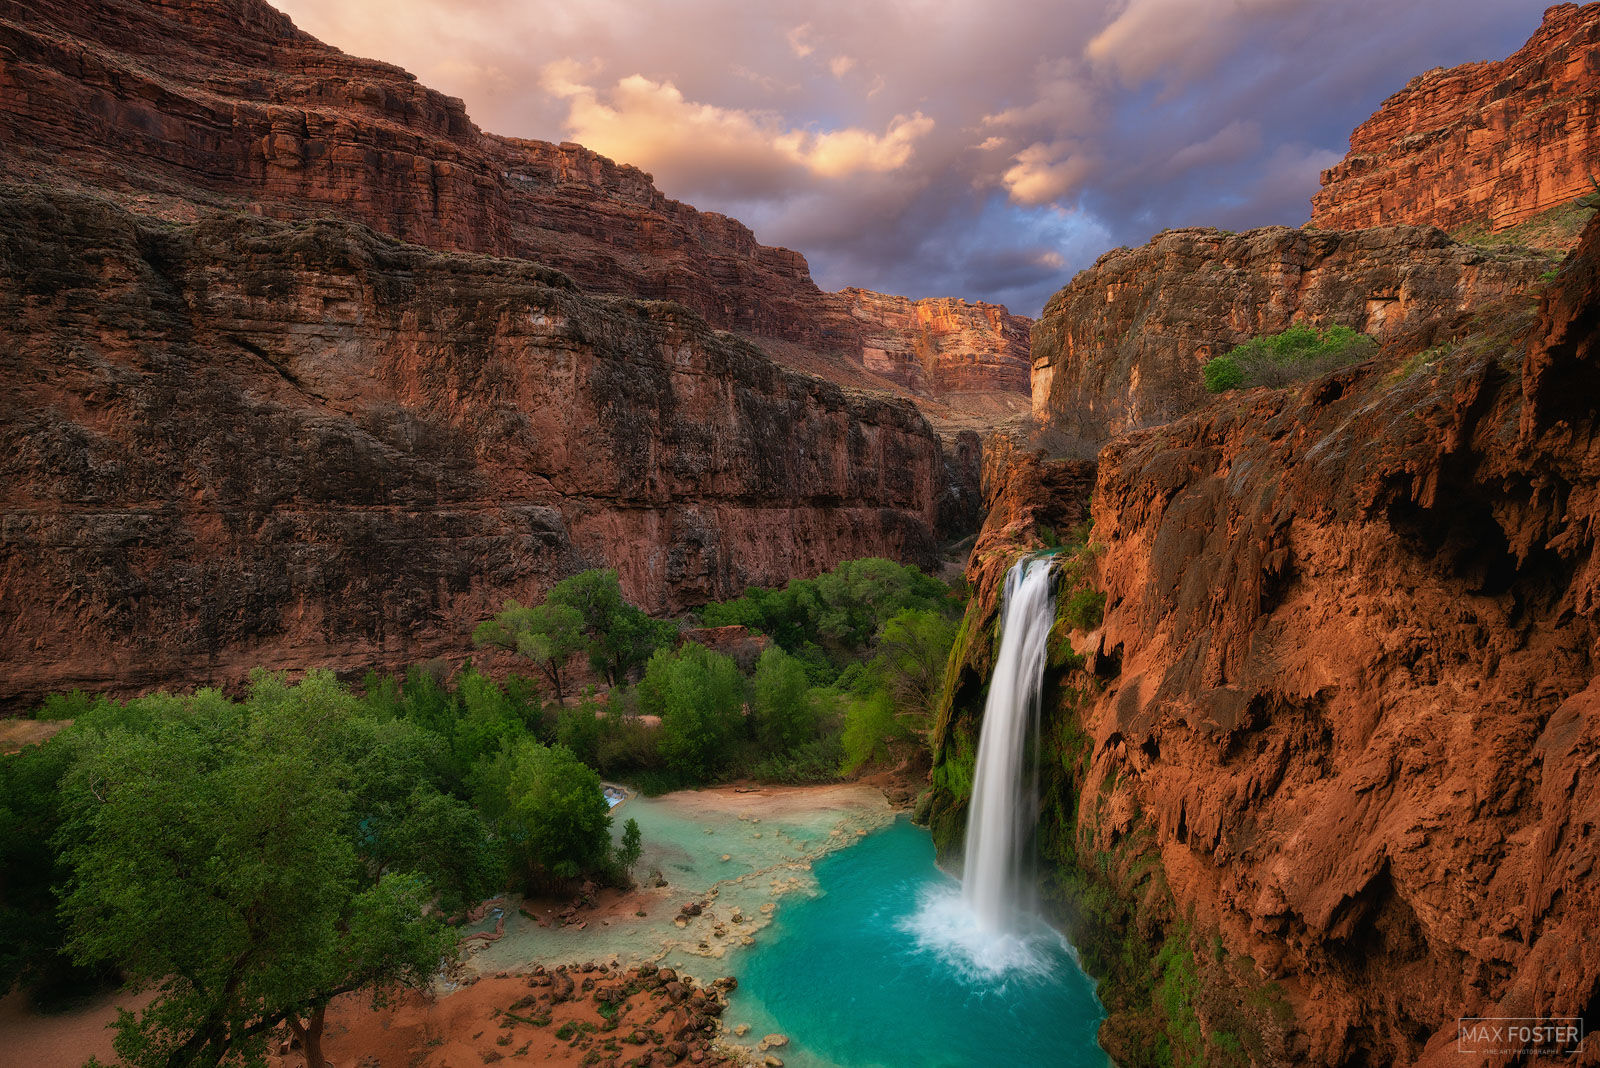 Elevate your space with Garden of Eden, Max Foster's limited edition photography print of Havasu Falls from his Grand Canyon...